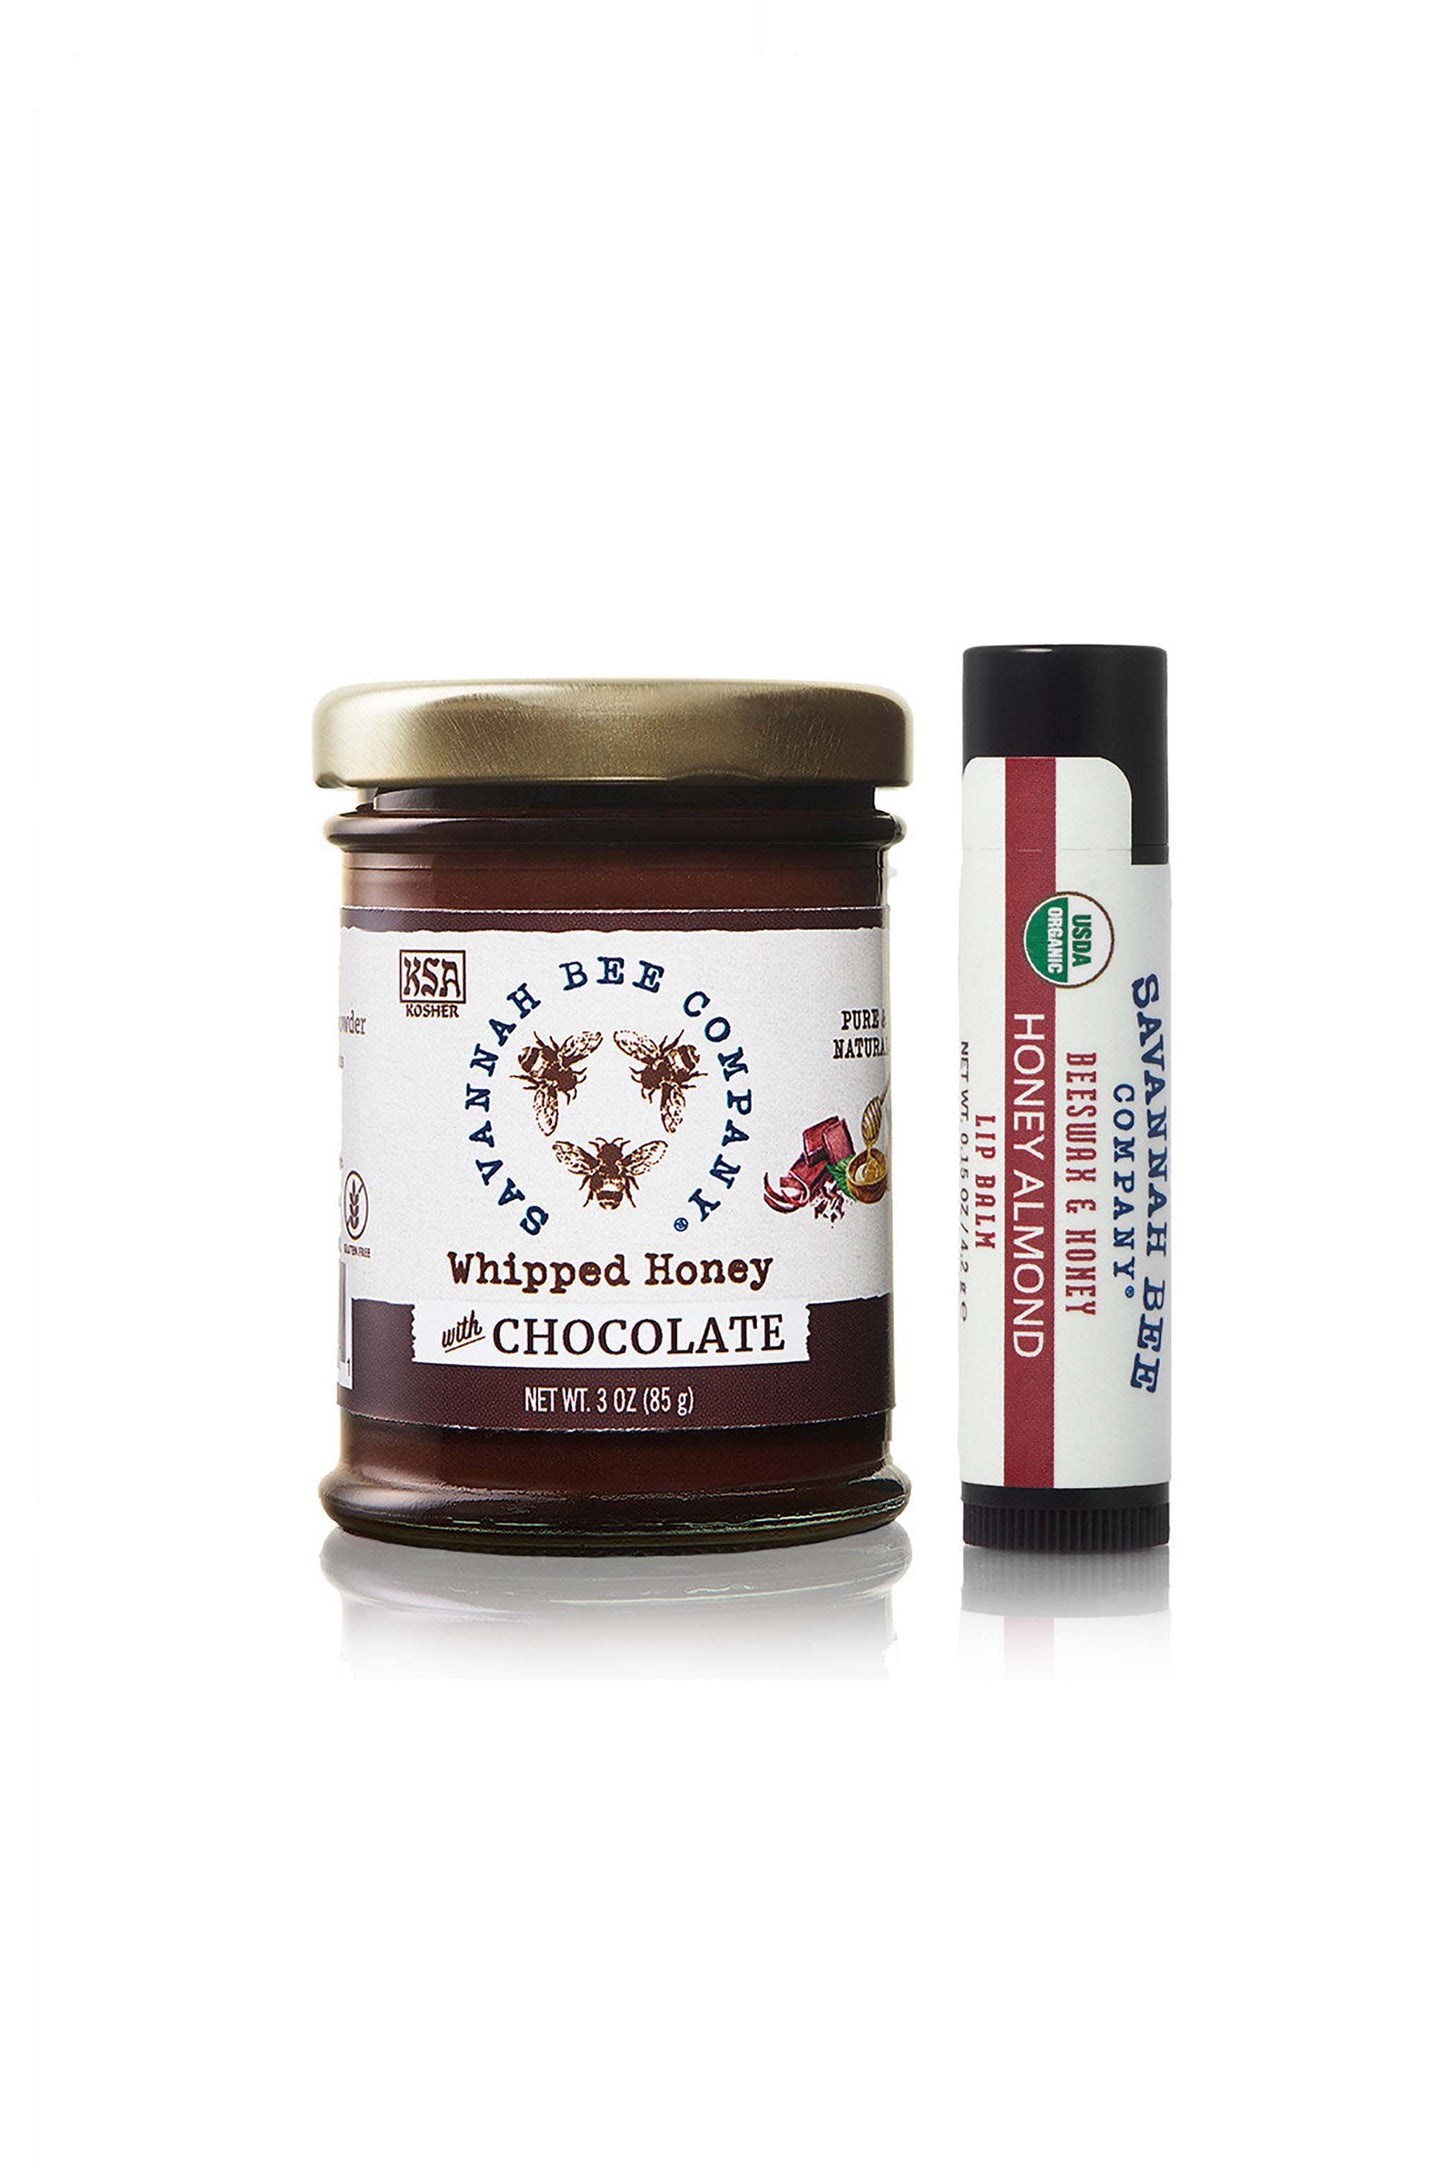 Whipped Honey with Chocolate 3 oz. mini with Honey Almond Lip Balm